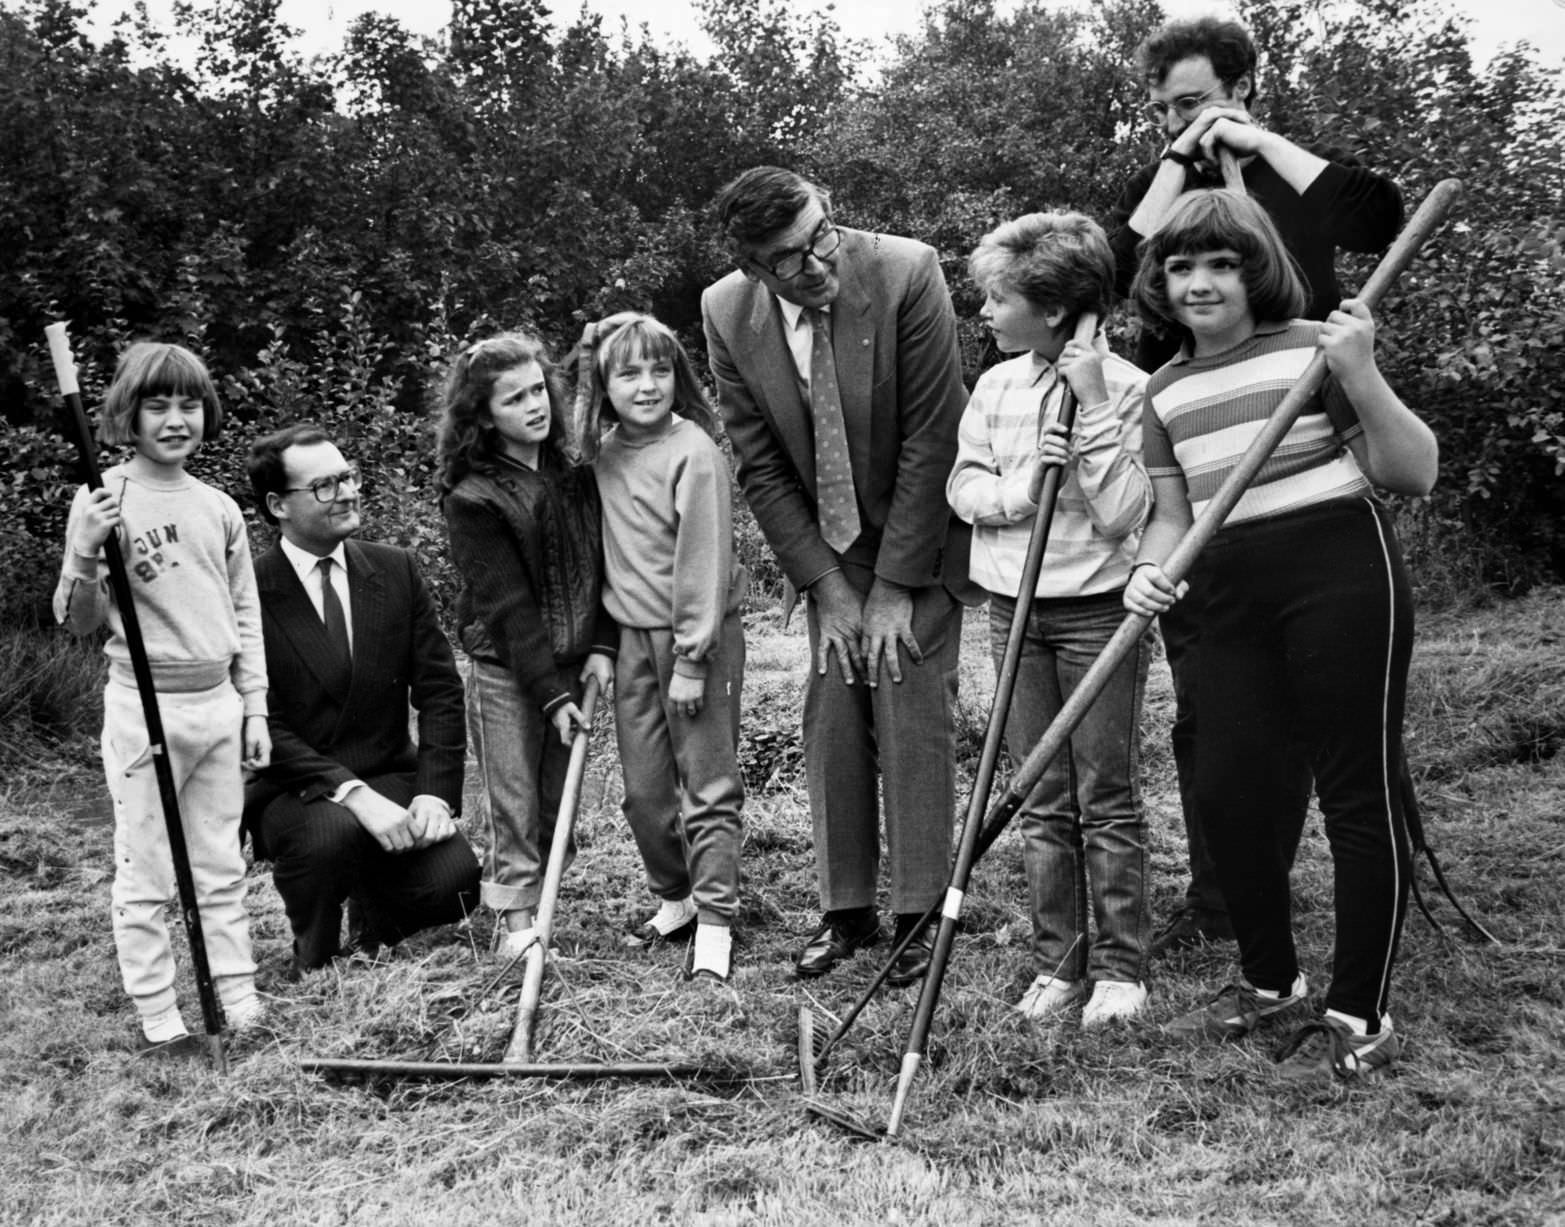 Pupils from John Fisher School in Knowsley Village with former Environment Secretary Mr Peter Jenkin, October 1989